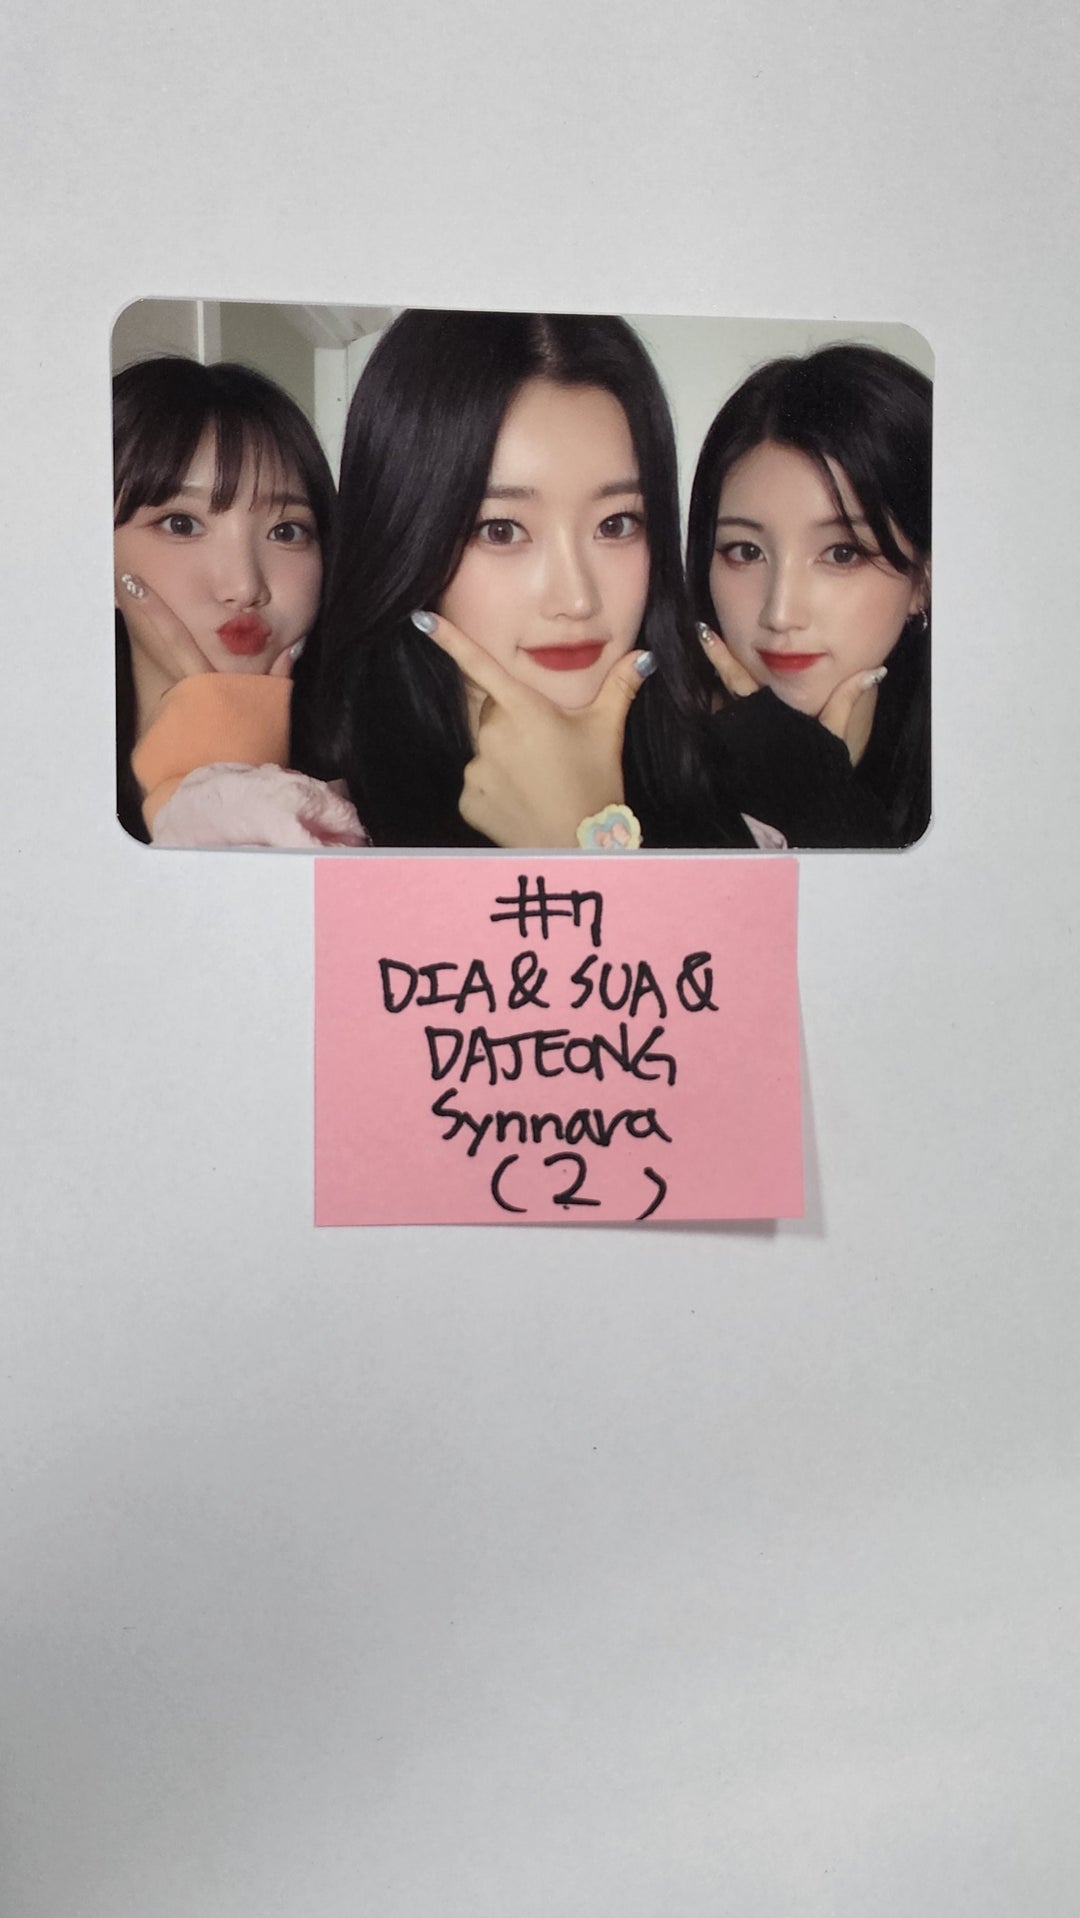 Pixy 'REBORN' - Synnara Fansign Event Photocard Round 4